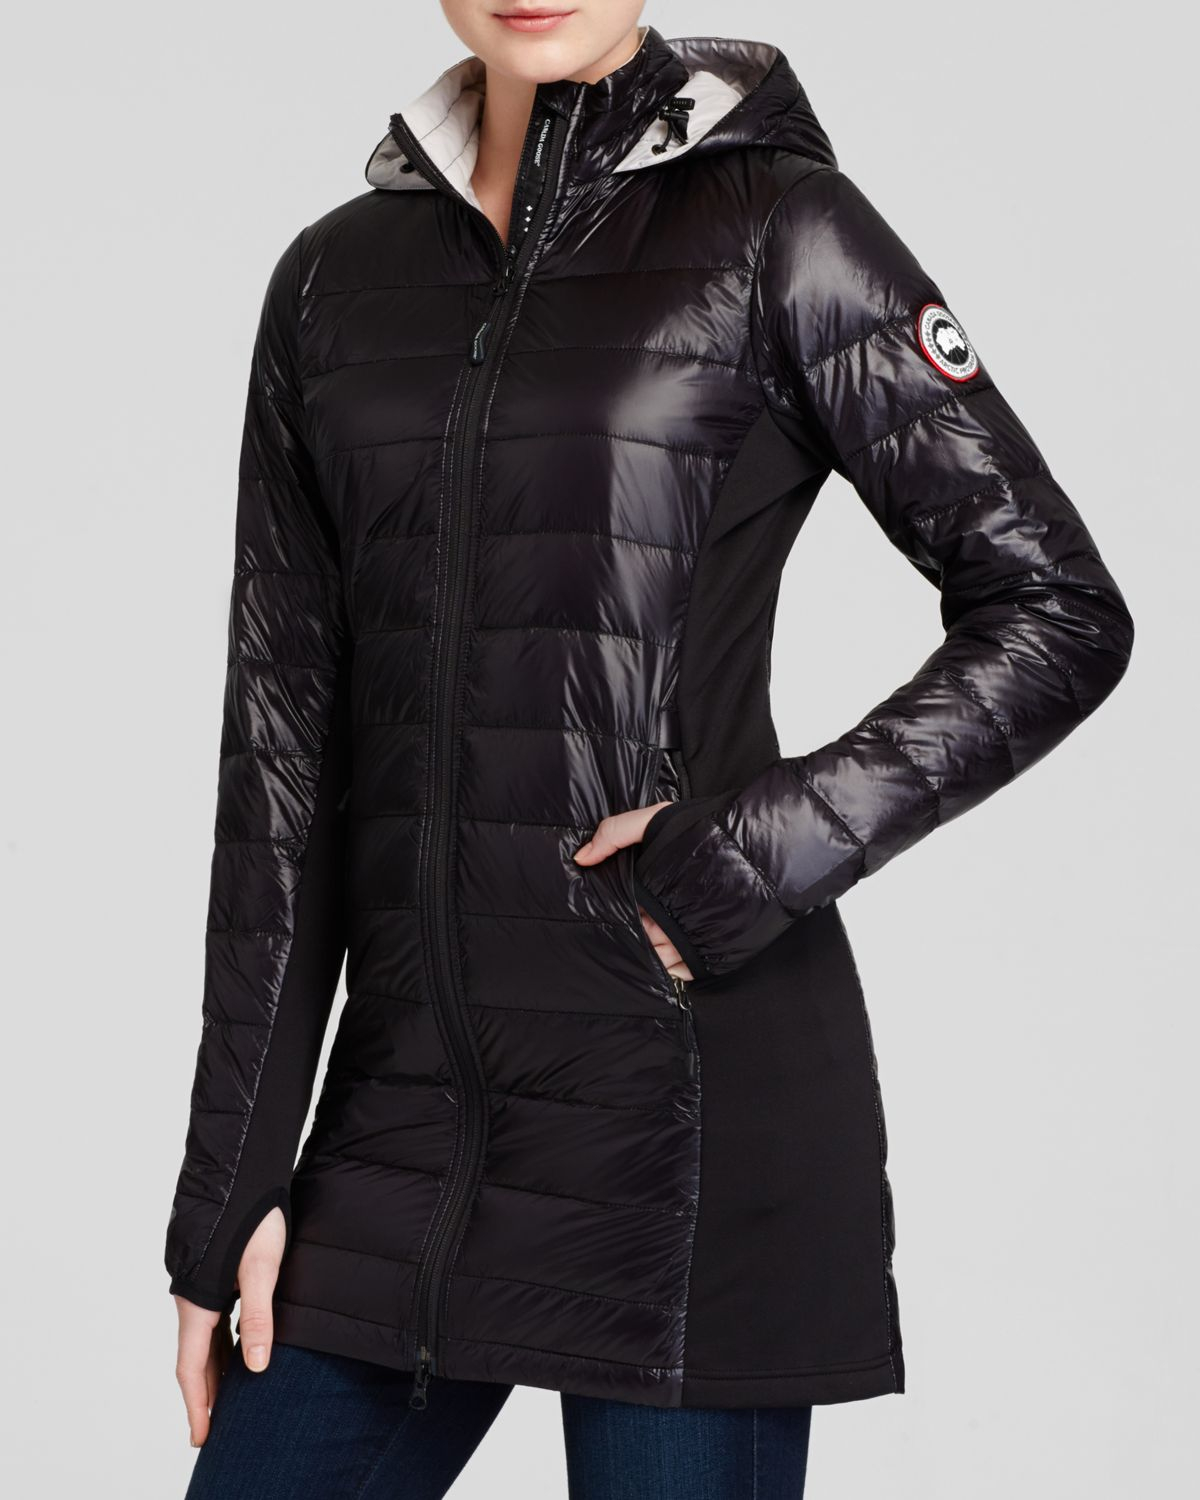 Canada Goose montebello parka online discounts - Save Up To 50% Off Canada Goose Sale To Bain Cheap On Sale